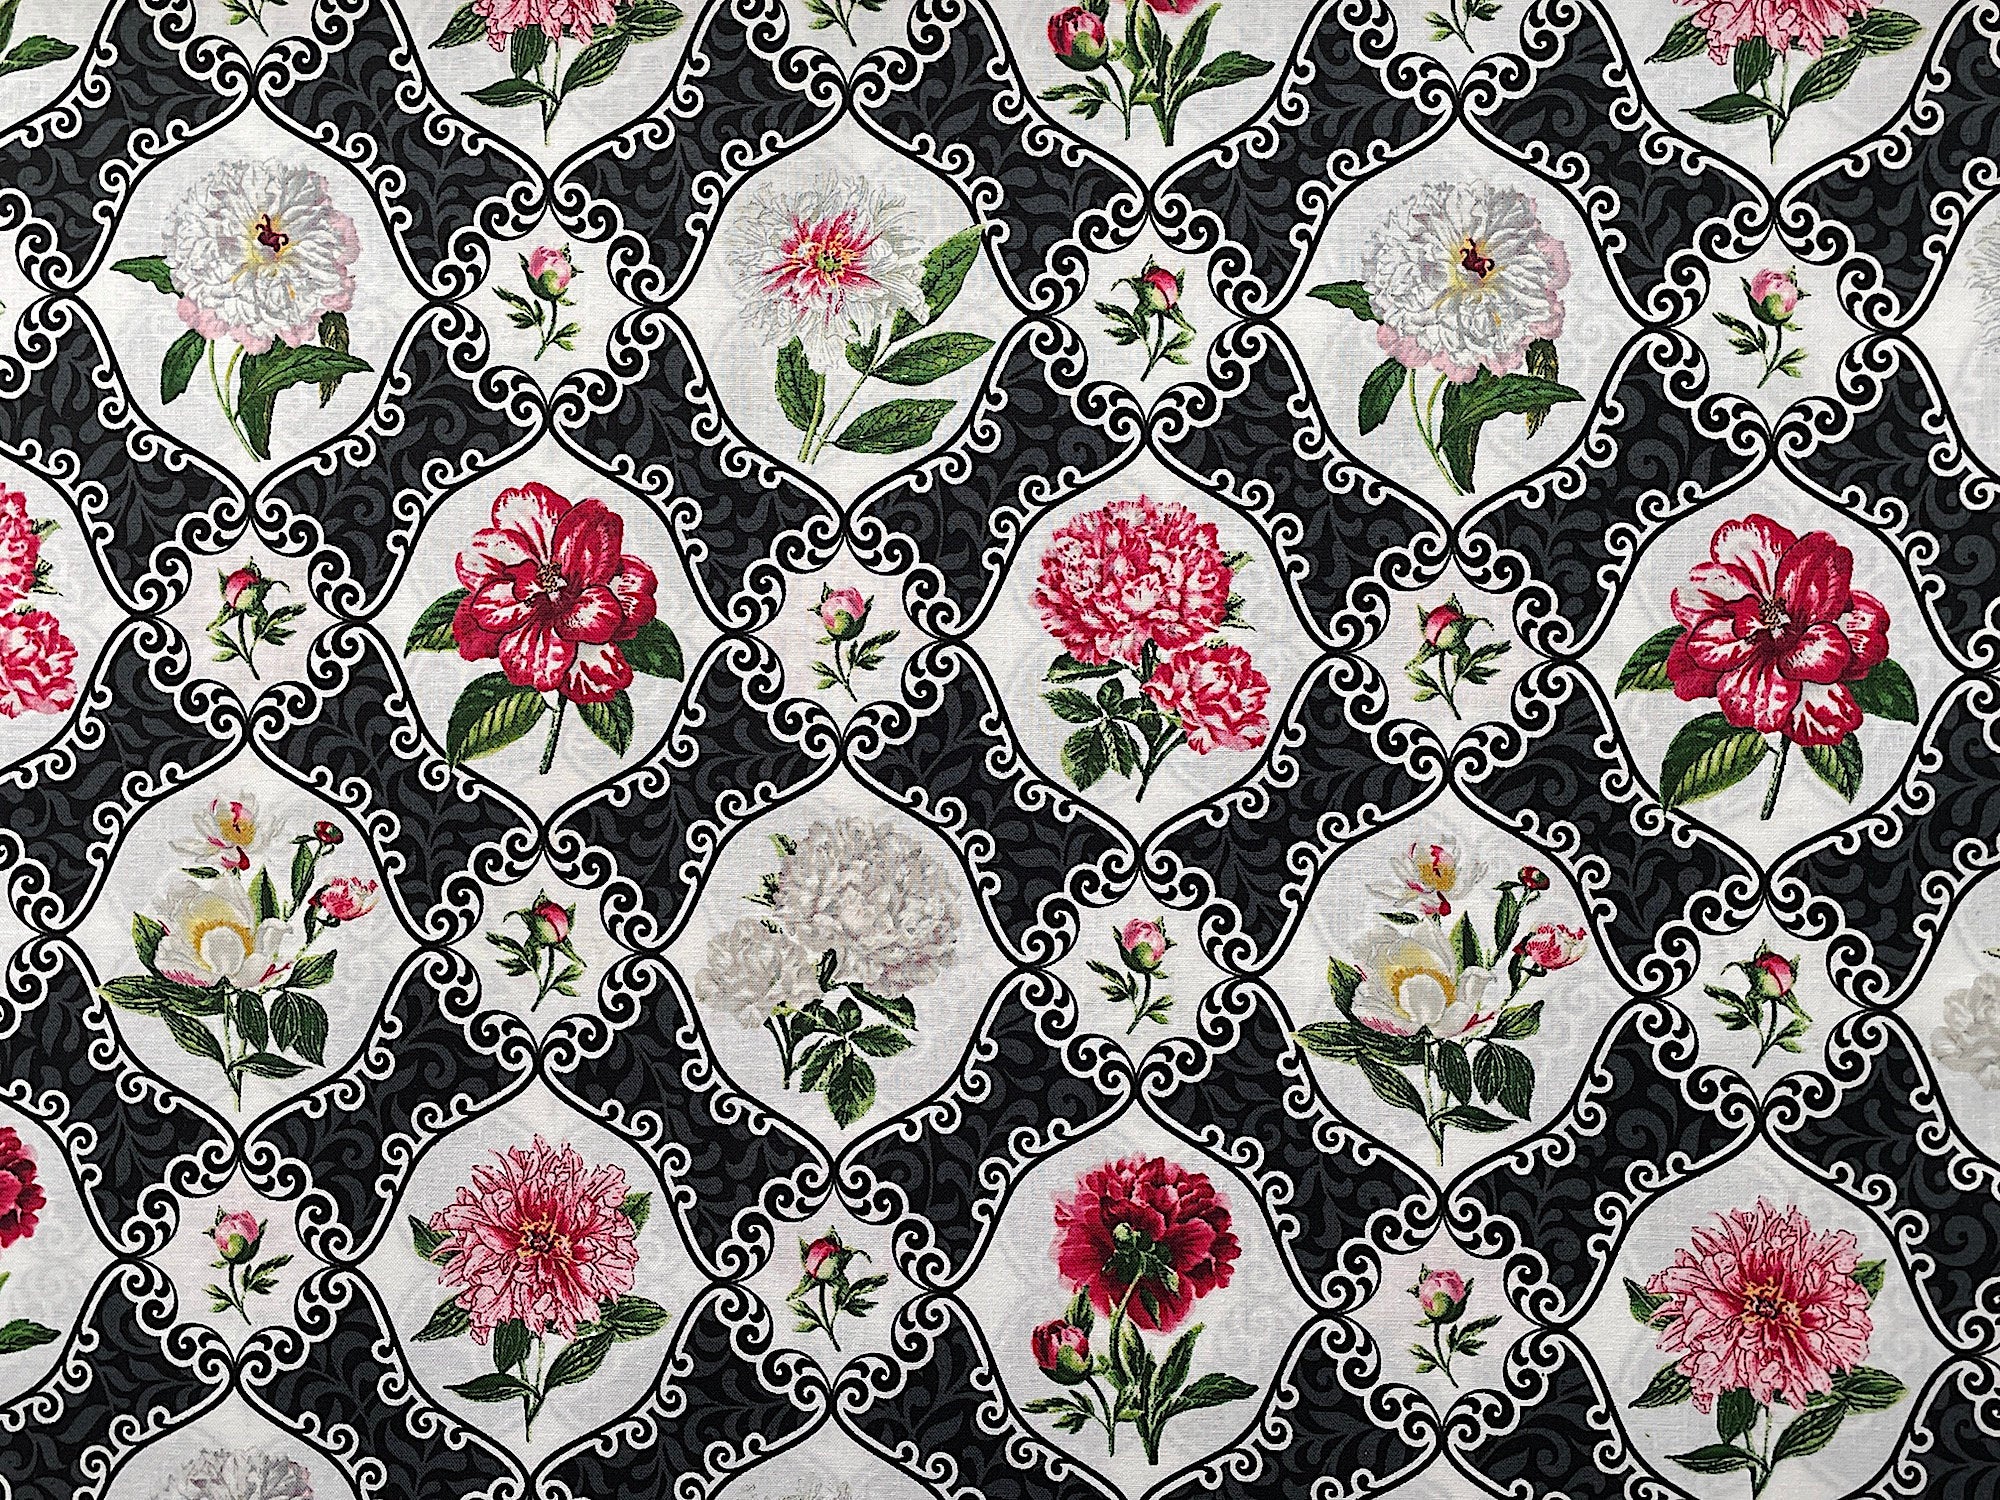 Black and White medallion fabric with red and white peonies inside of the medallions.